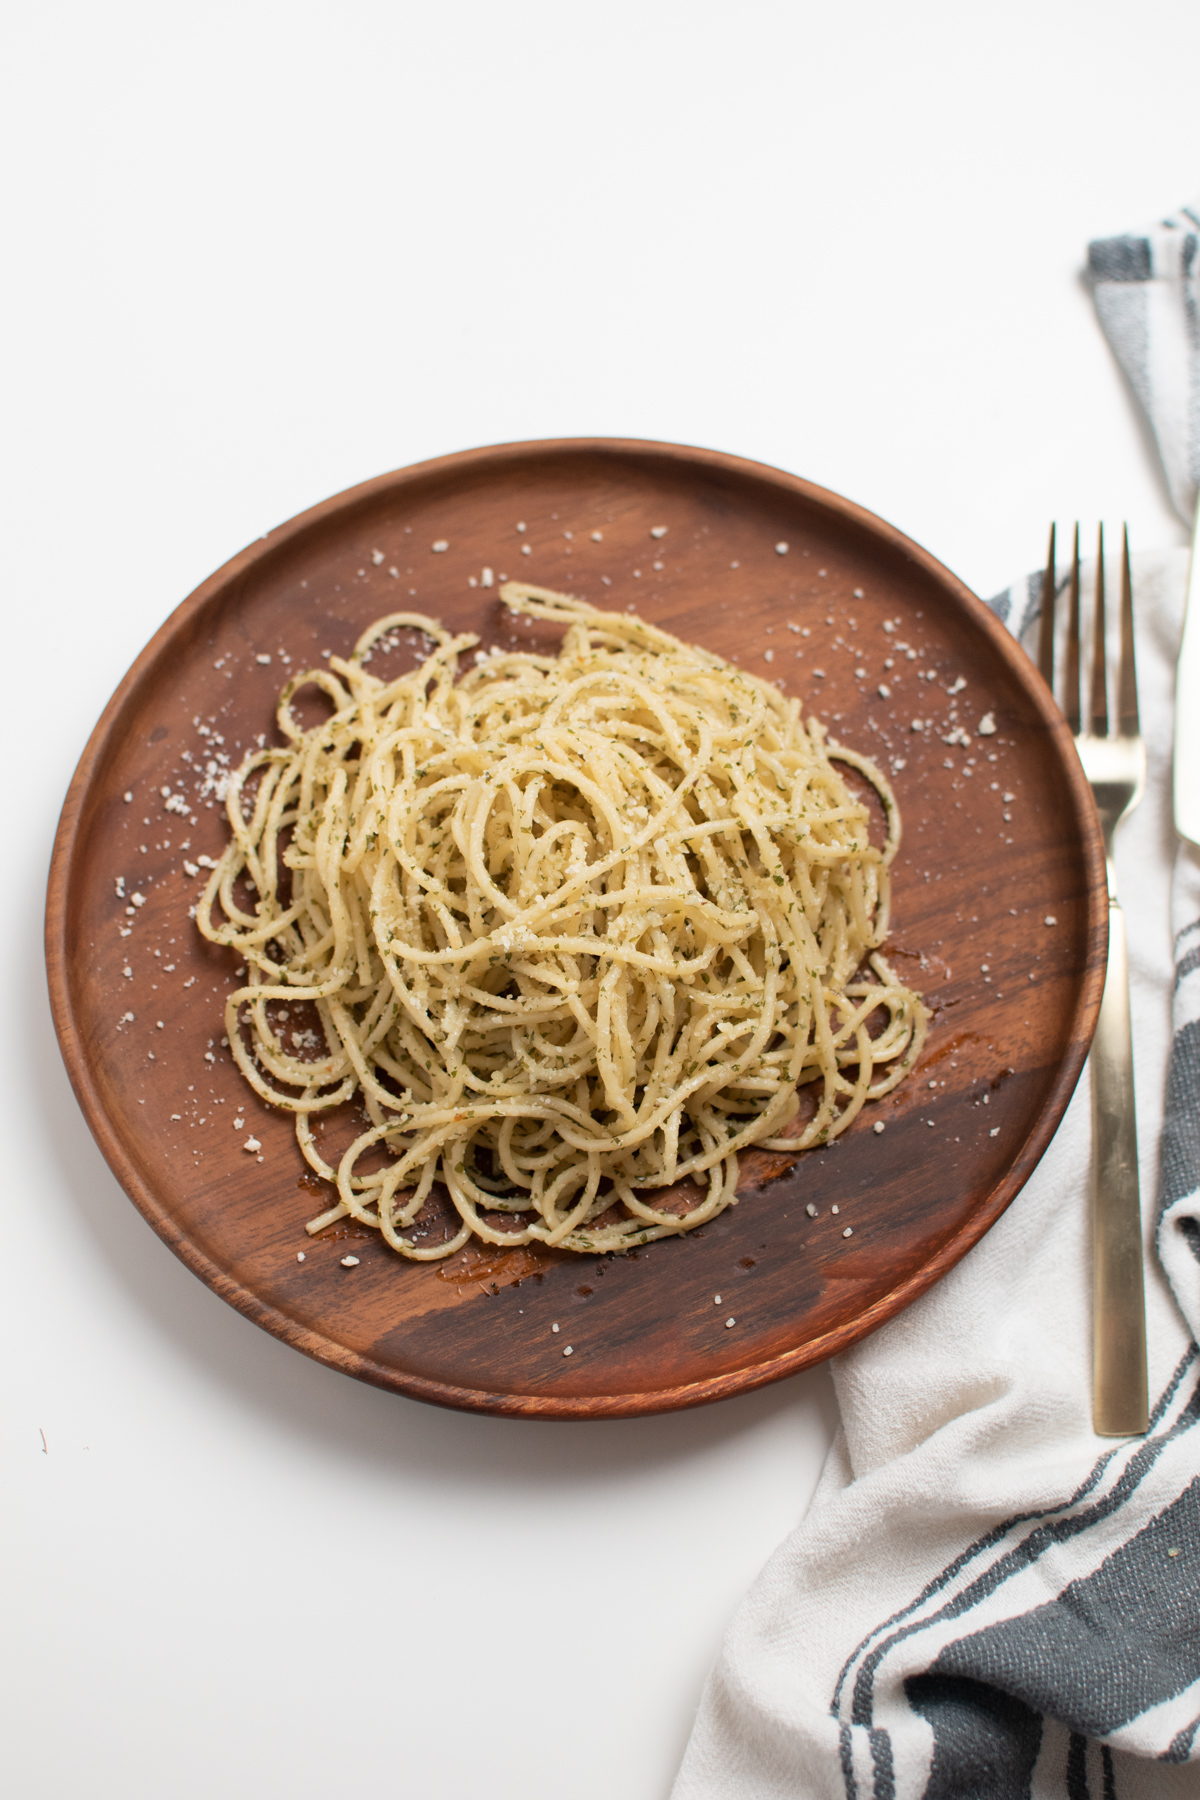 Aglio olio recipe on wood plate next to fork and gray and white kitchen towel.